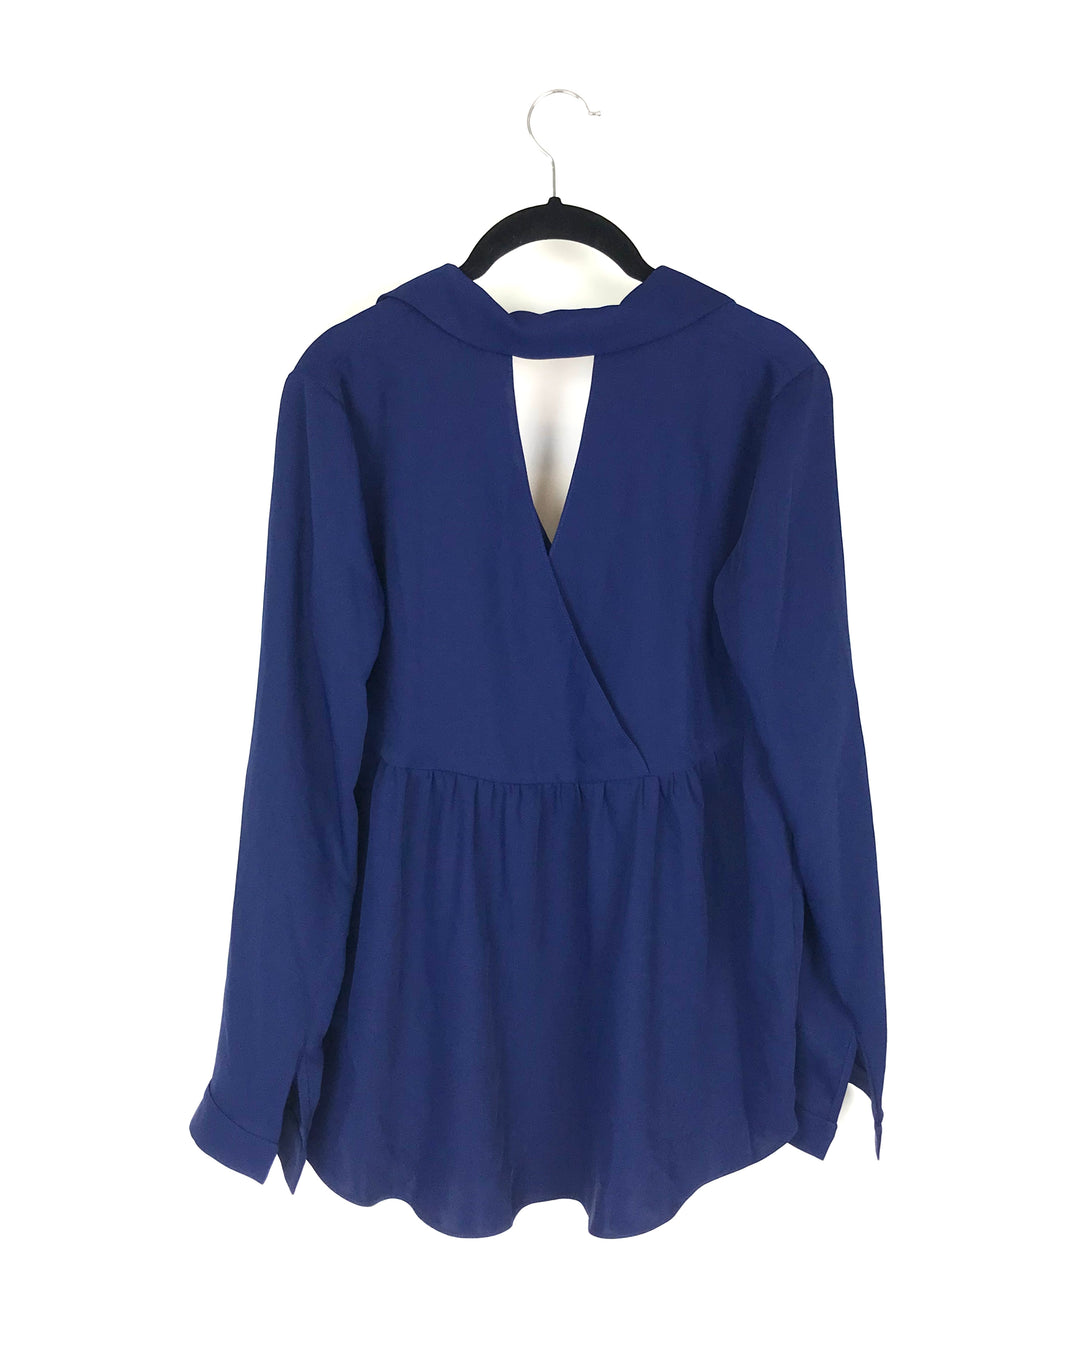 Navy Blue Long Sleeve Top - Small